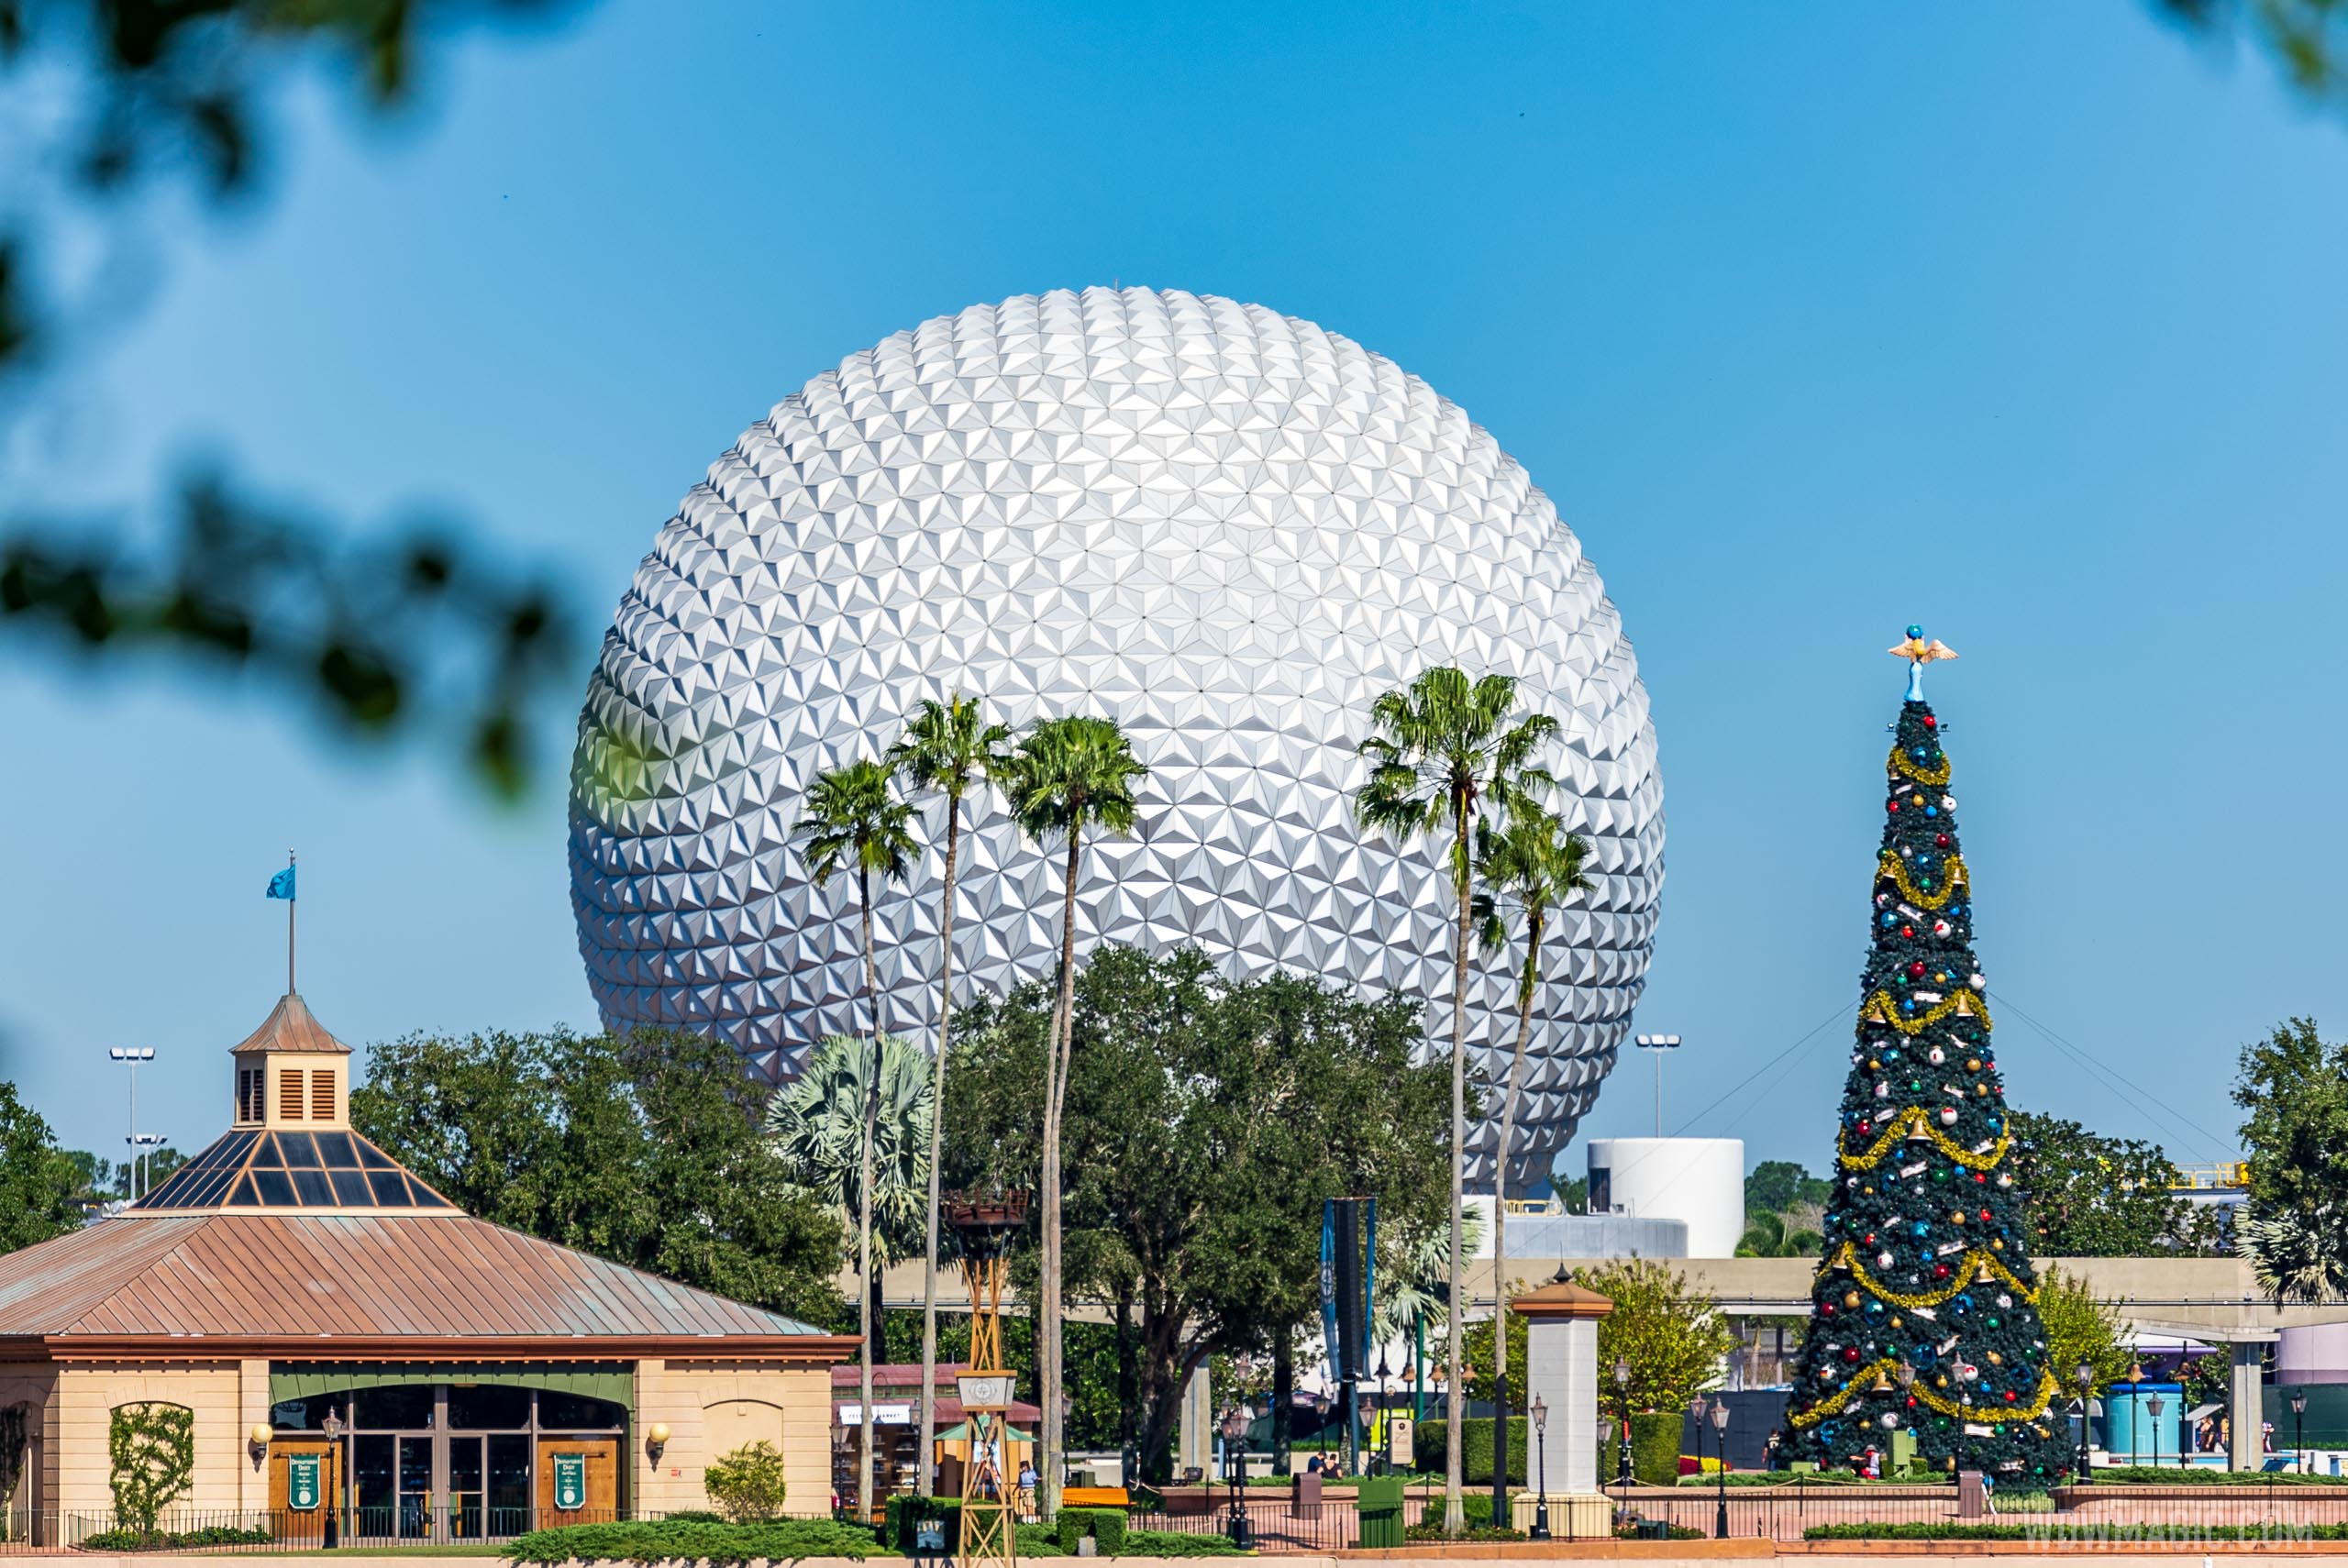 Holiday decor now on display at EPCOT